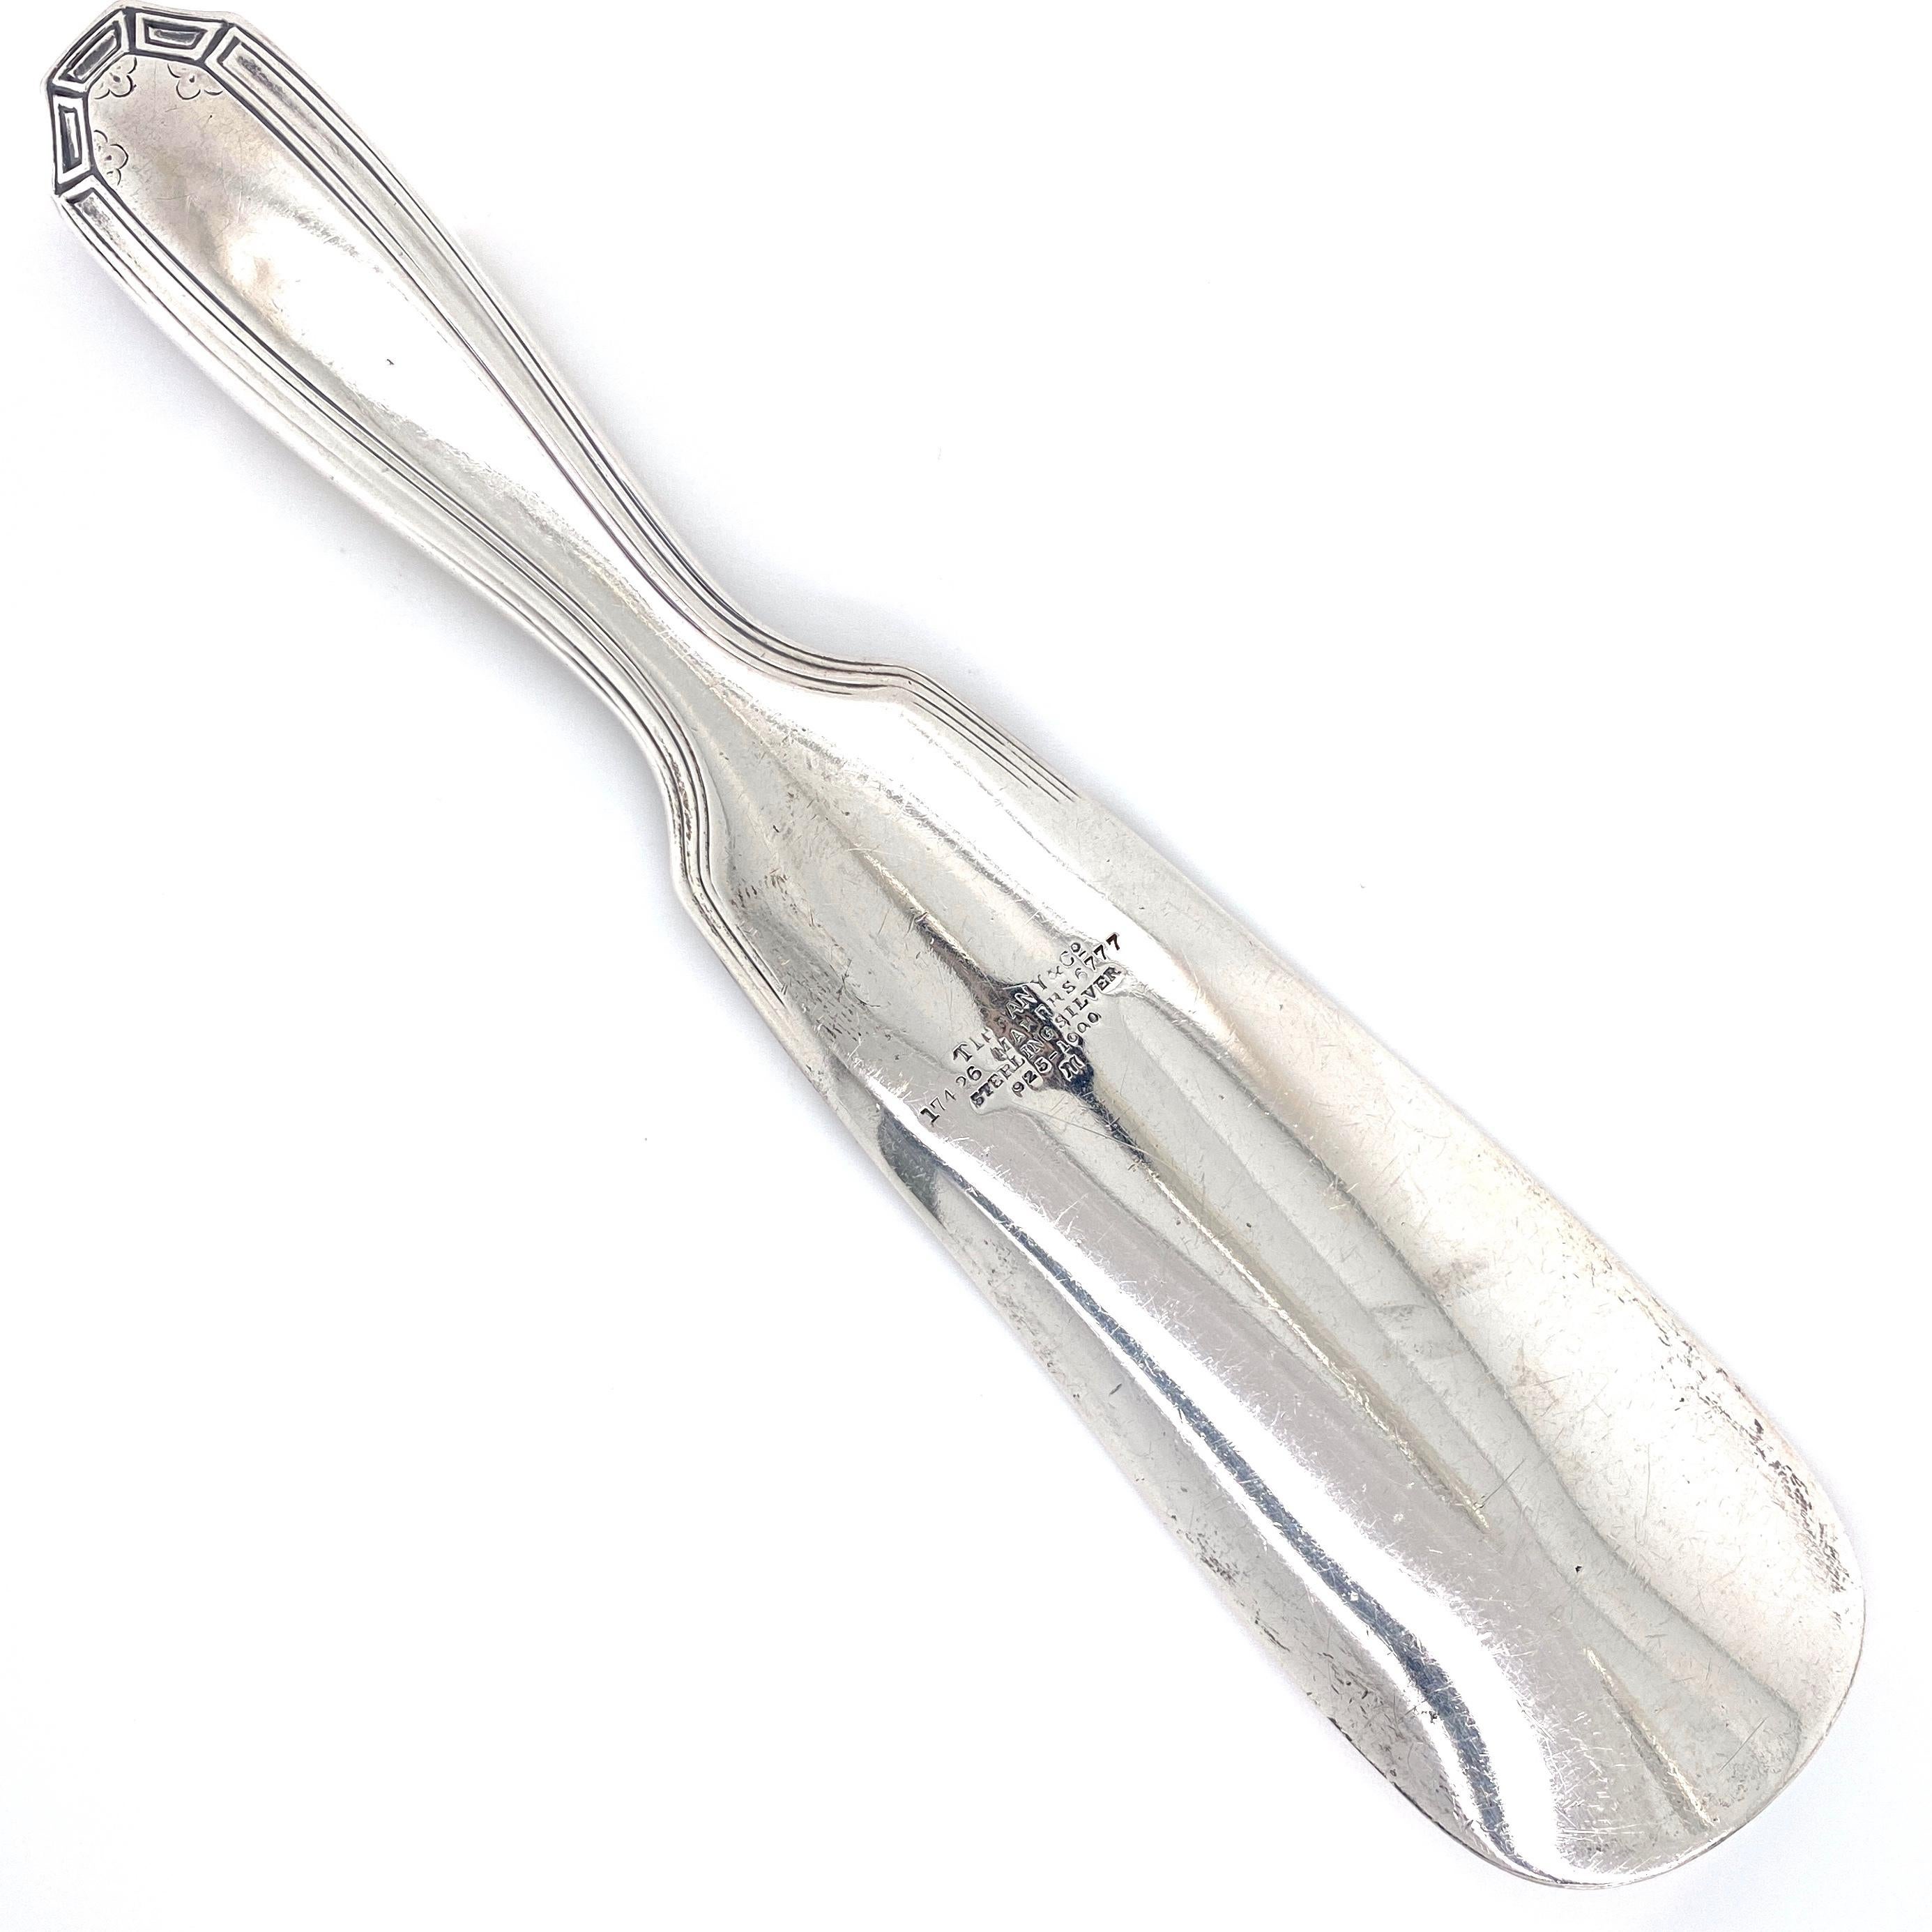 Tiffany & Co. sterling silver shoe horn. The handle is Hand engraved with geometric designs. Marked: TIFFANY & CO, 17426 MAKERS 6777, STERLING
SILVER, 925/1000.
 